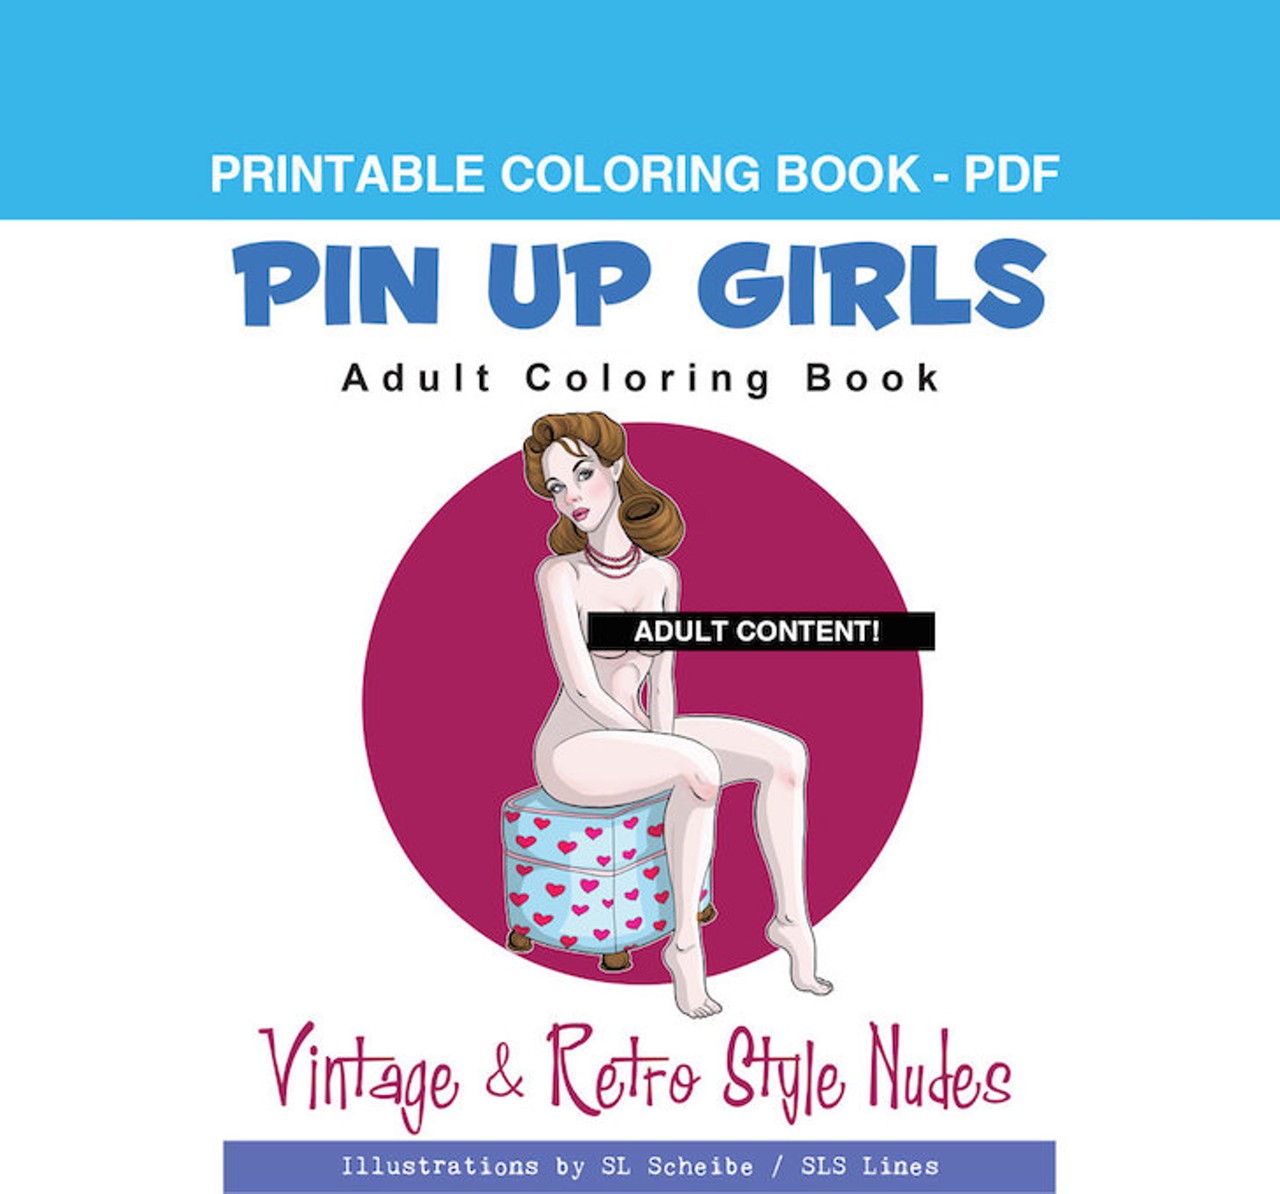  Pin Up Girls Adult Coloring Book
&#147;This PDF (digital) coloring book is filled with gorgeous nude pin-ups in vintage and retro style (1950s - 1970s).&#148;
Buy it at etsy.com 